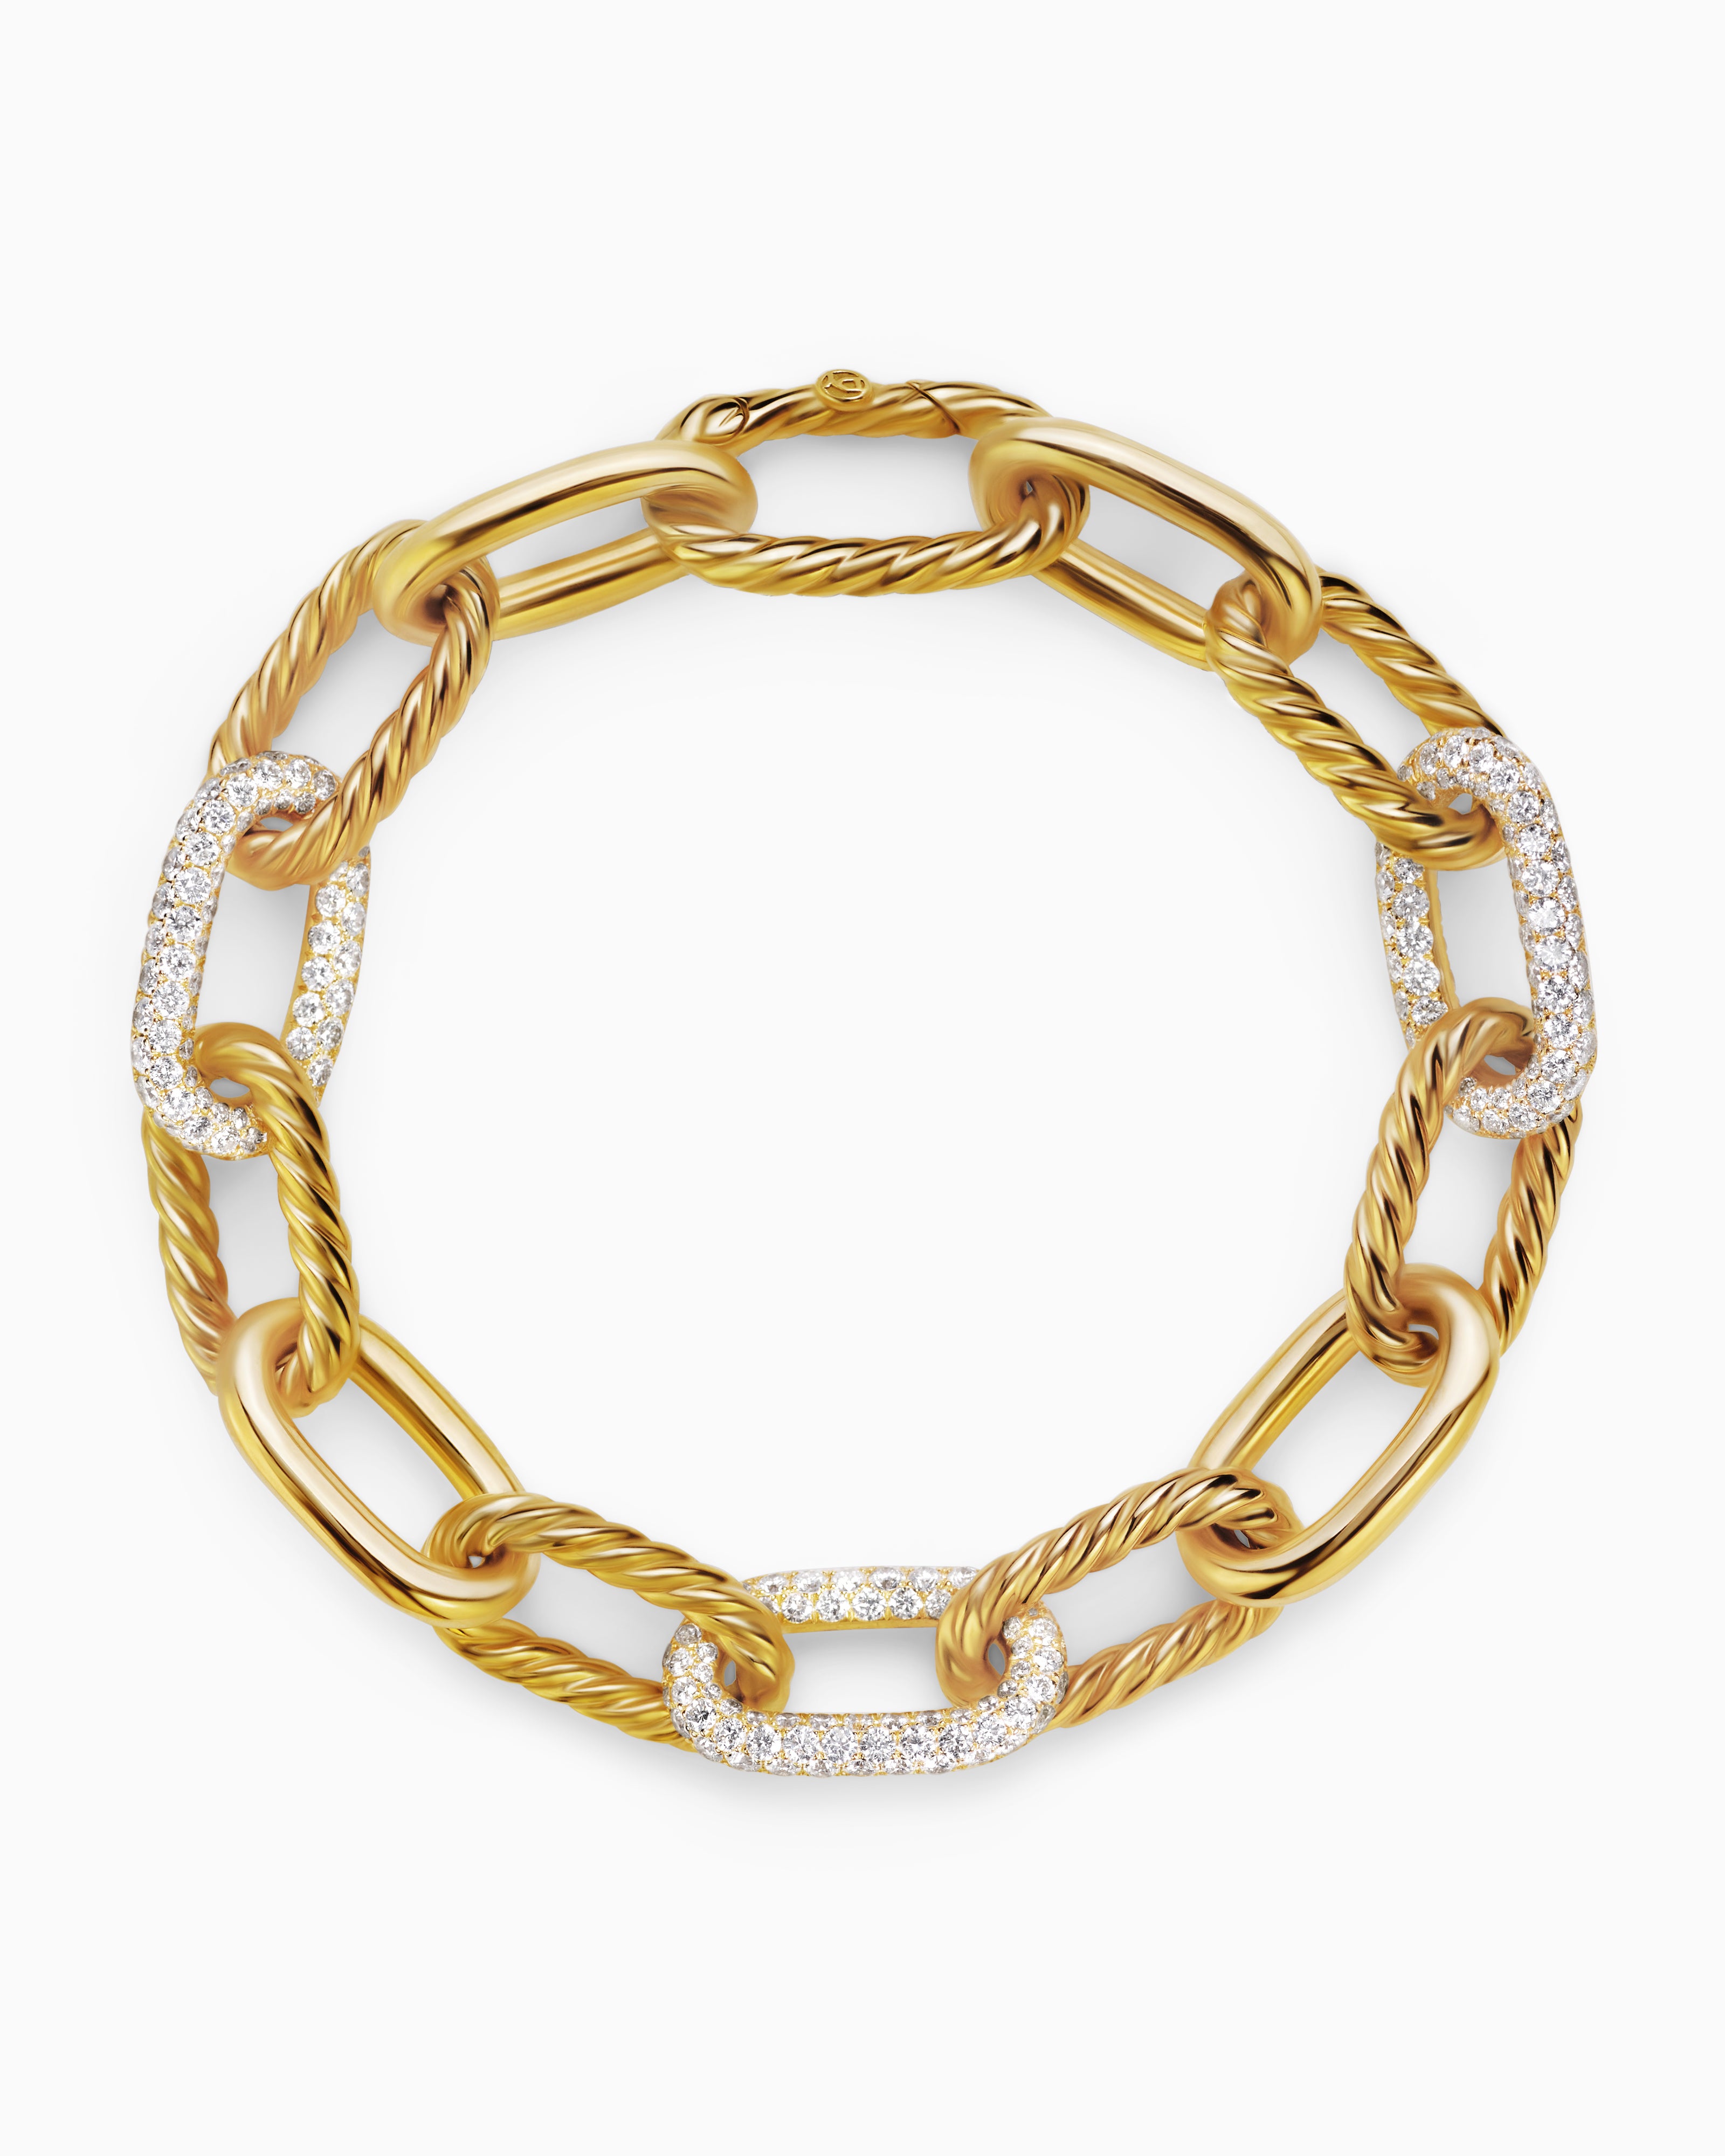 DY Madison Chain Bracelet in 18K Yellow Gold with Diamonds, 11mm